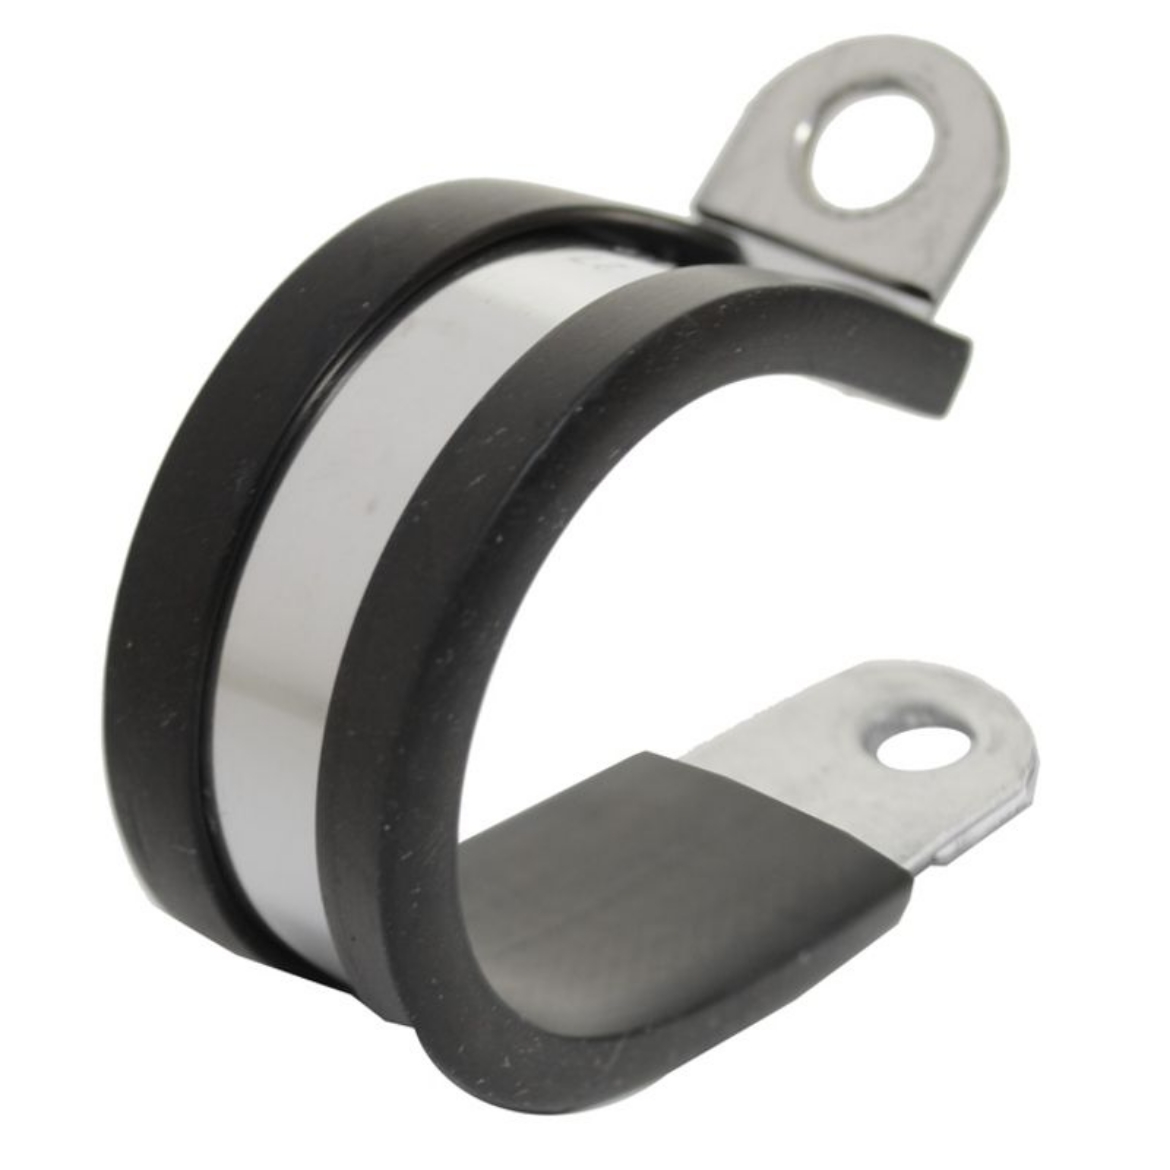 Picture of LV AUTOMOTIVE CABLE CLAMP STAINLESS STEEL 25mm EPDM RUBBER 6.4MM MOUNT HOLE - 10 PACK